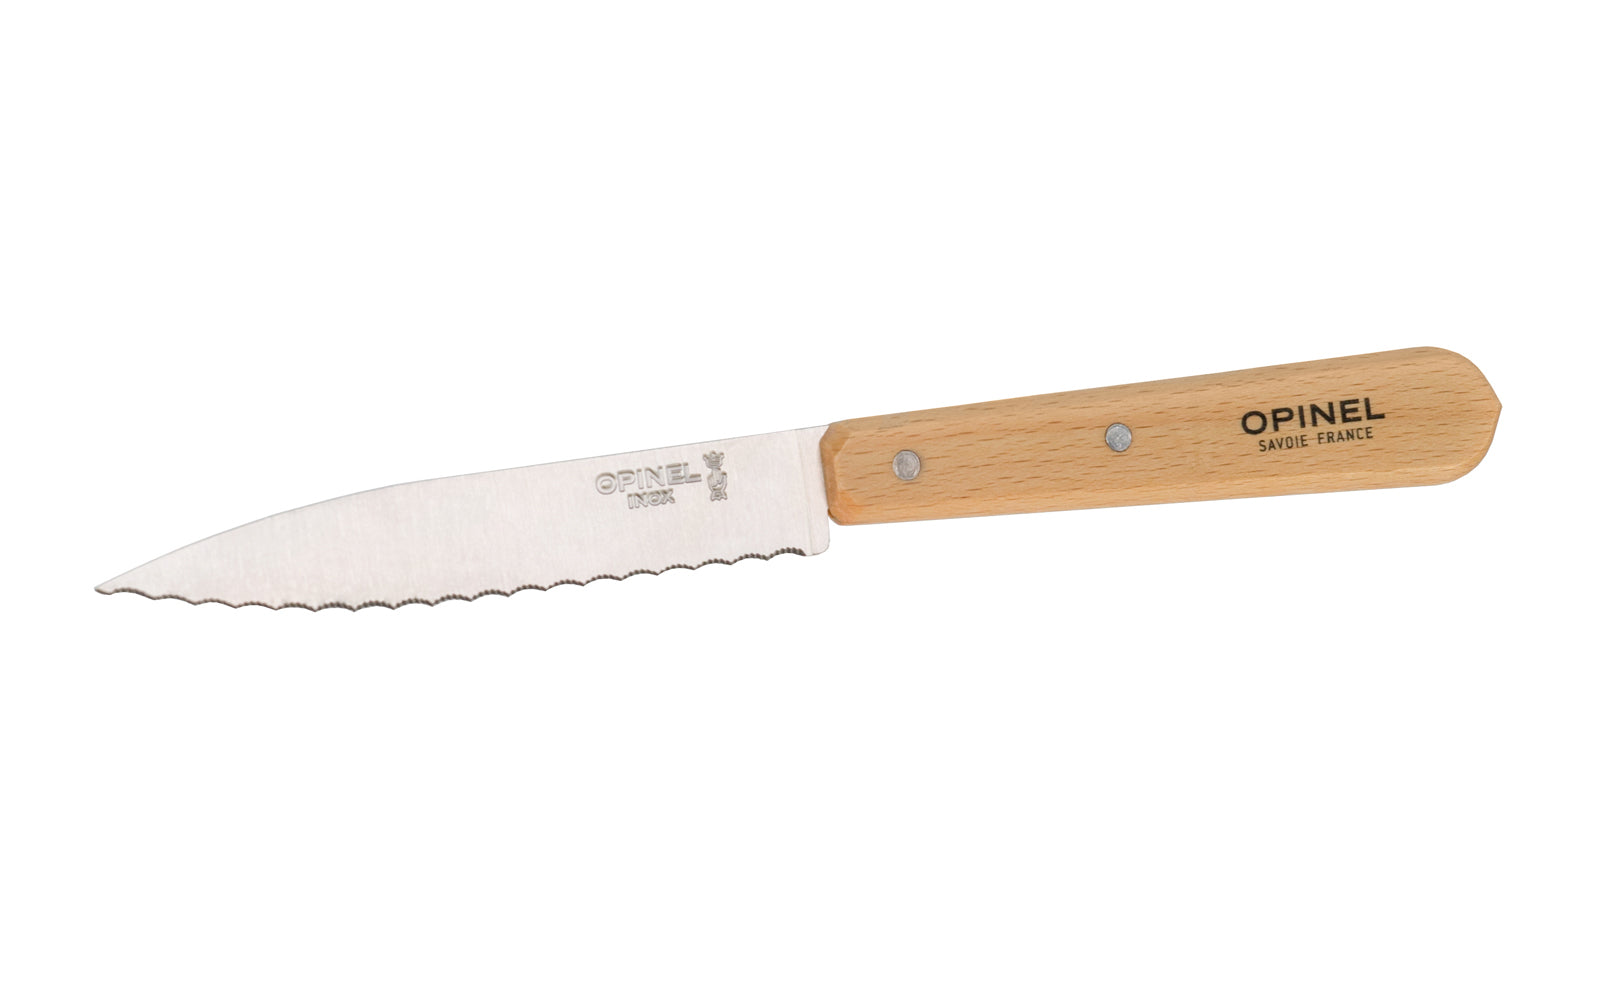 Opinel Stainless Steel Paring Knife. Model 113. Opinel Stainless Steel Serrated Paring Knife. Excellent for slicing through the rough skins of citrus fruits, tomatoes, & is ideal for cured sausages like salami. The handsome Beechwood handle is varnished for beautiful look. Made in France.